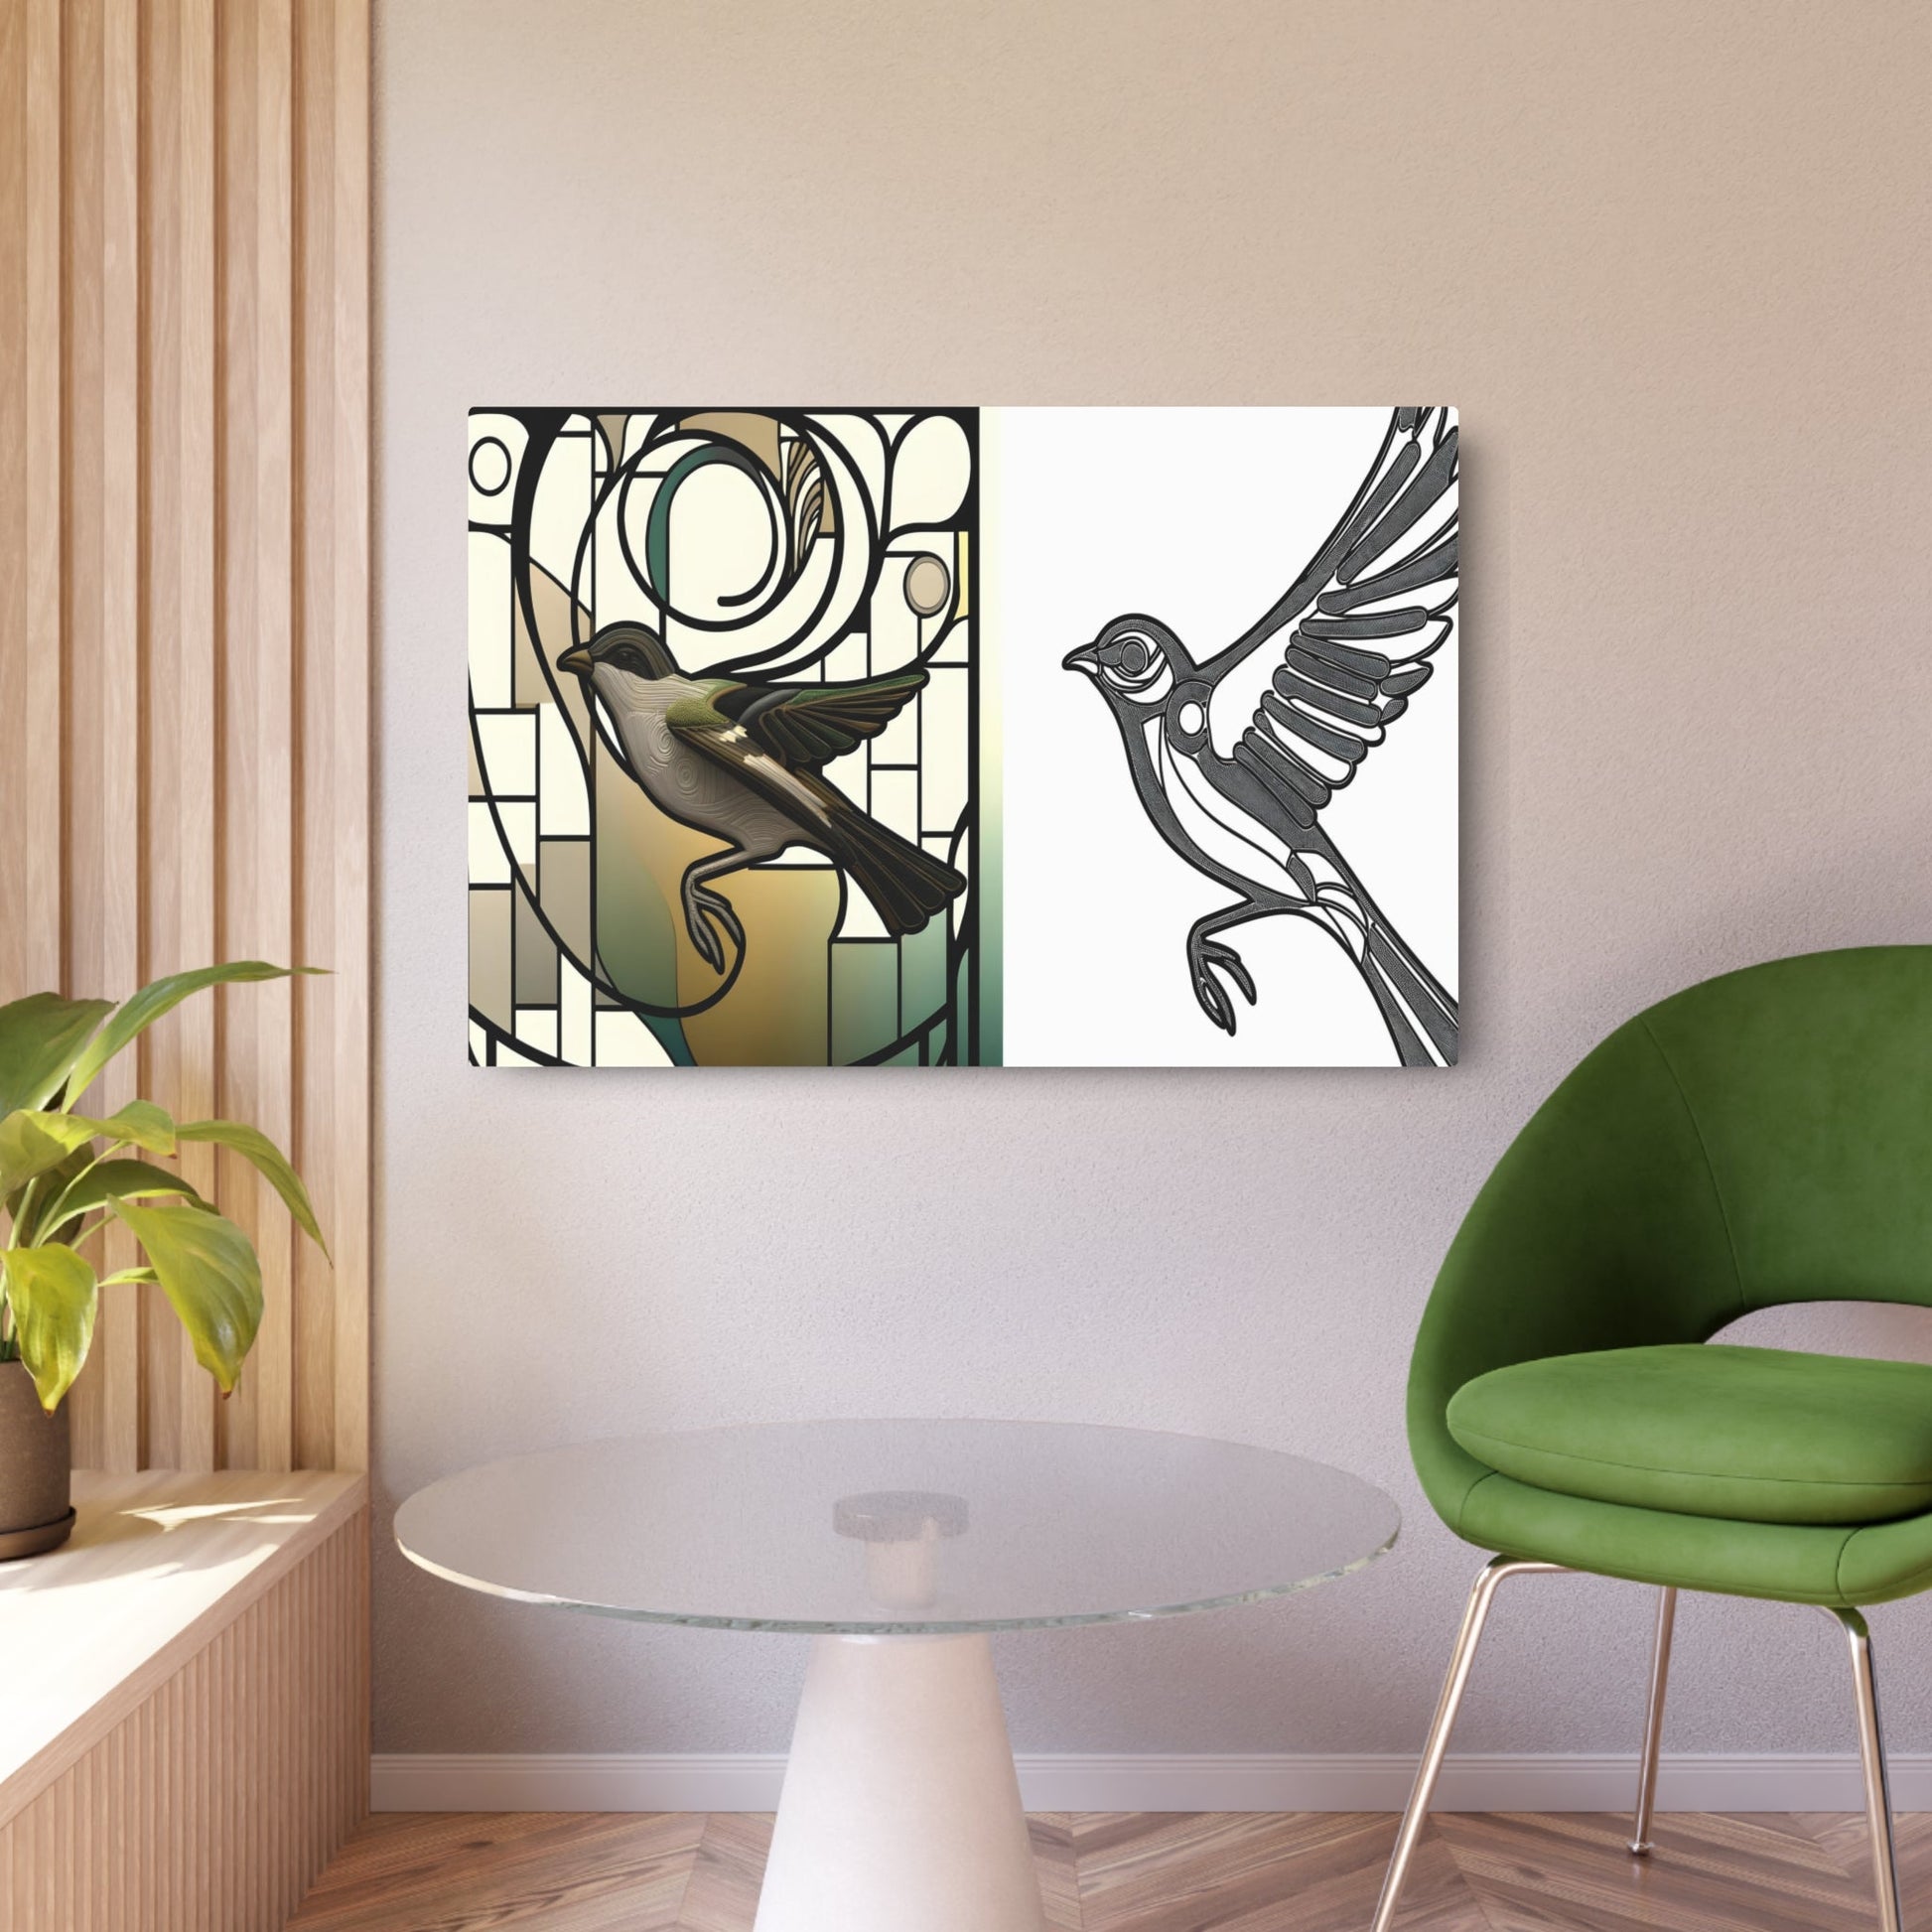 Metal Poster Art | "Art Nouveau Inspired Bird Illustration with Intricate Patterns - Western Art Styles Collection" - Metal Poster Art 36″ x 24″ (Horizontal) 0.12''